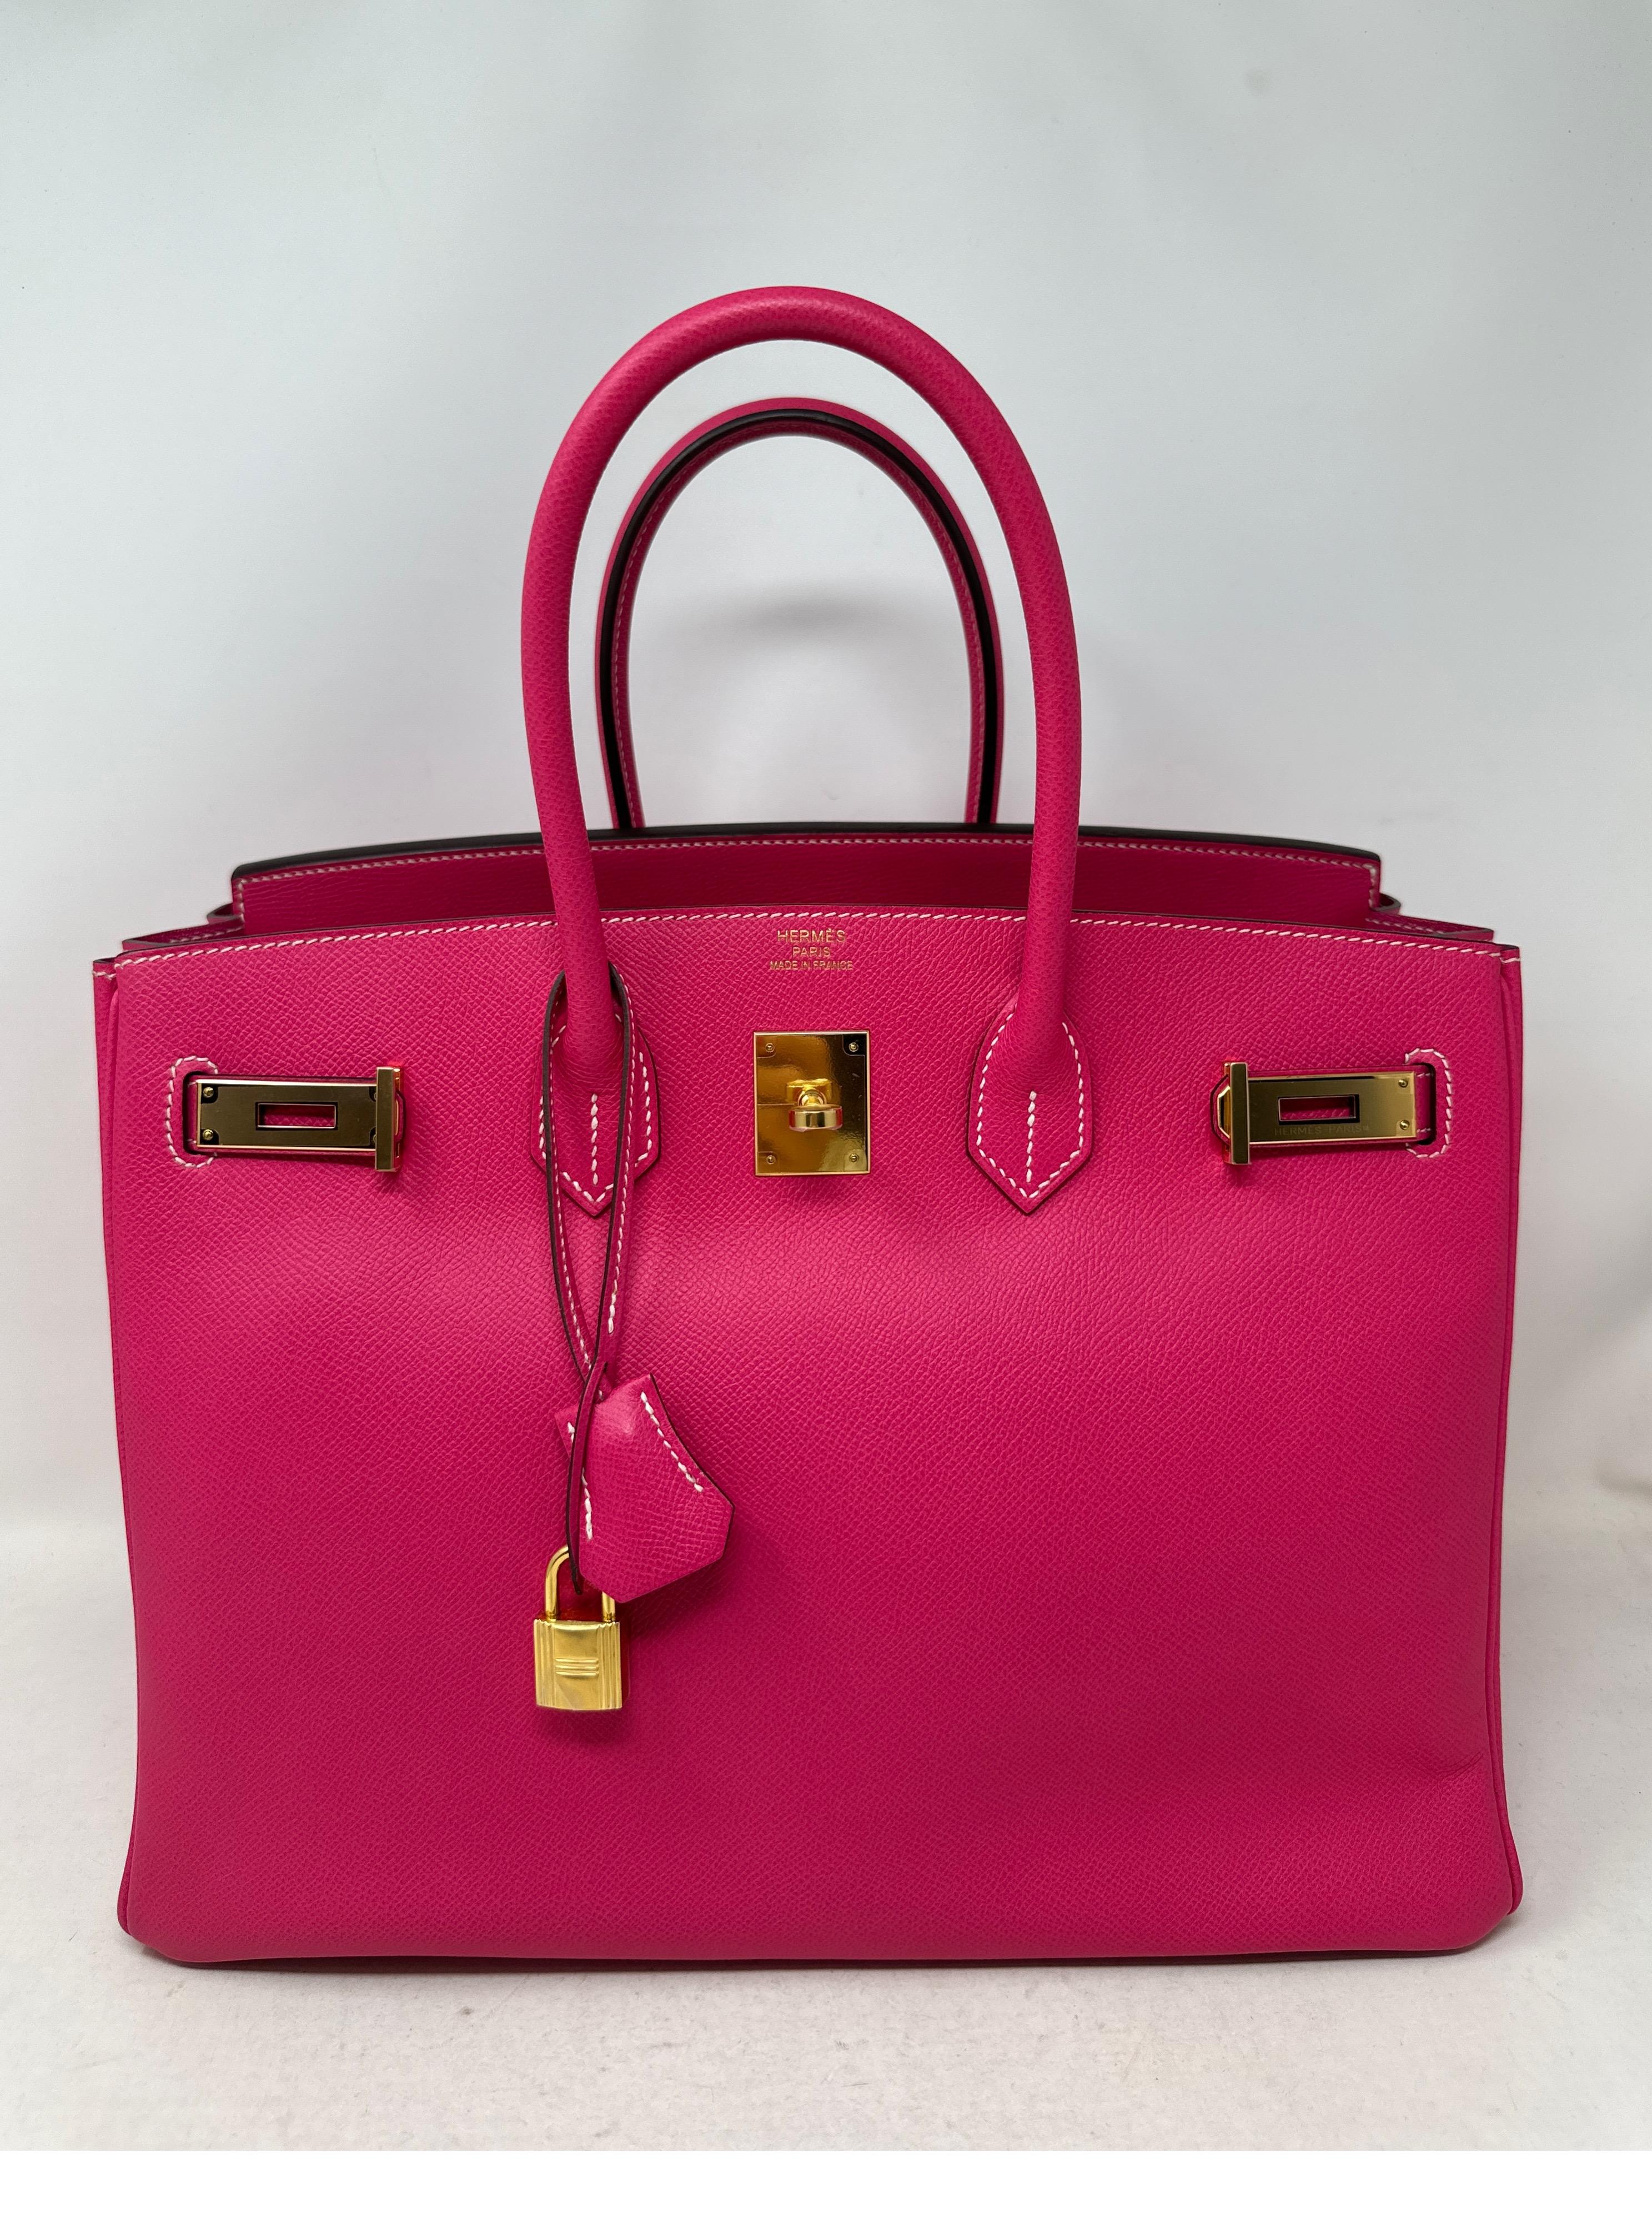 Hermes Rose Tyrien Birkin 35 Bag. Gold hardware. Beautiful hot pink color in epsom leather. Interior clean. Looks like new condition. Rare gold hardware with this pink color. Includes clochette, lock, keys, and dust bag. Guaranteed authentic. 